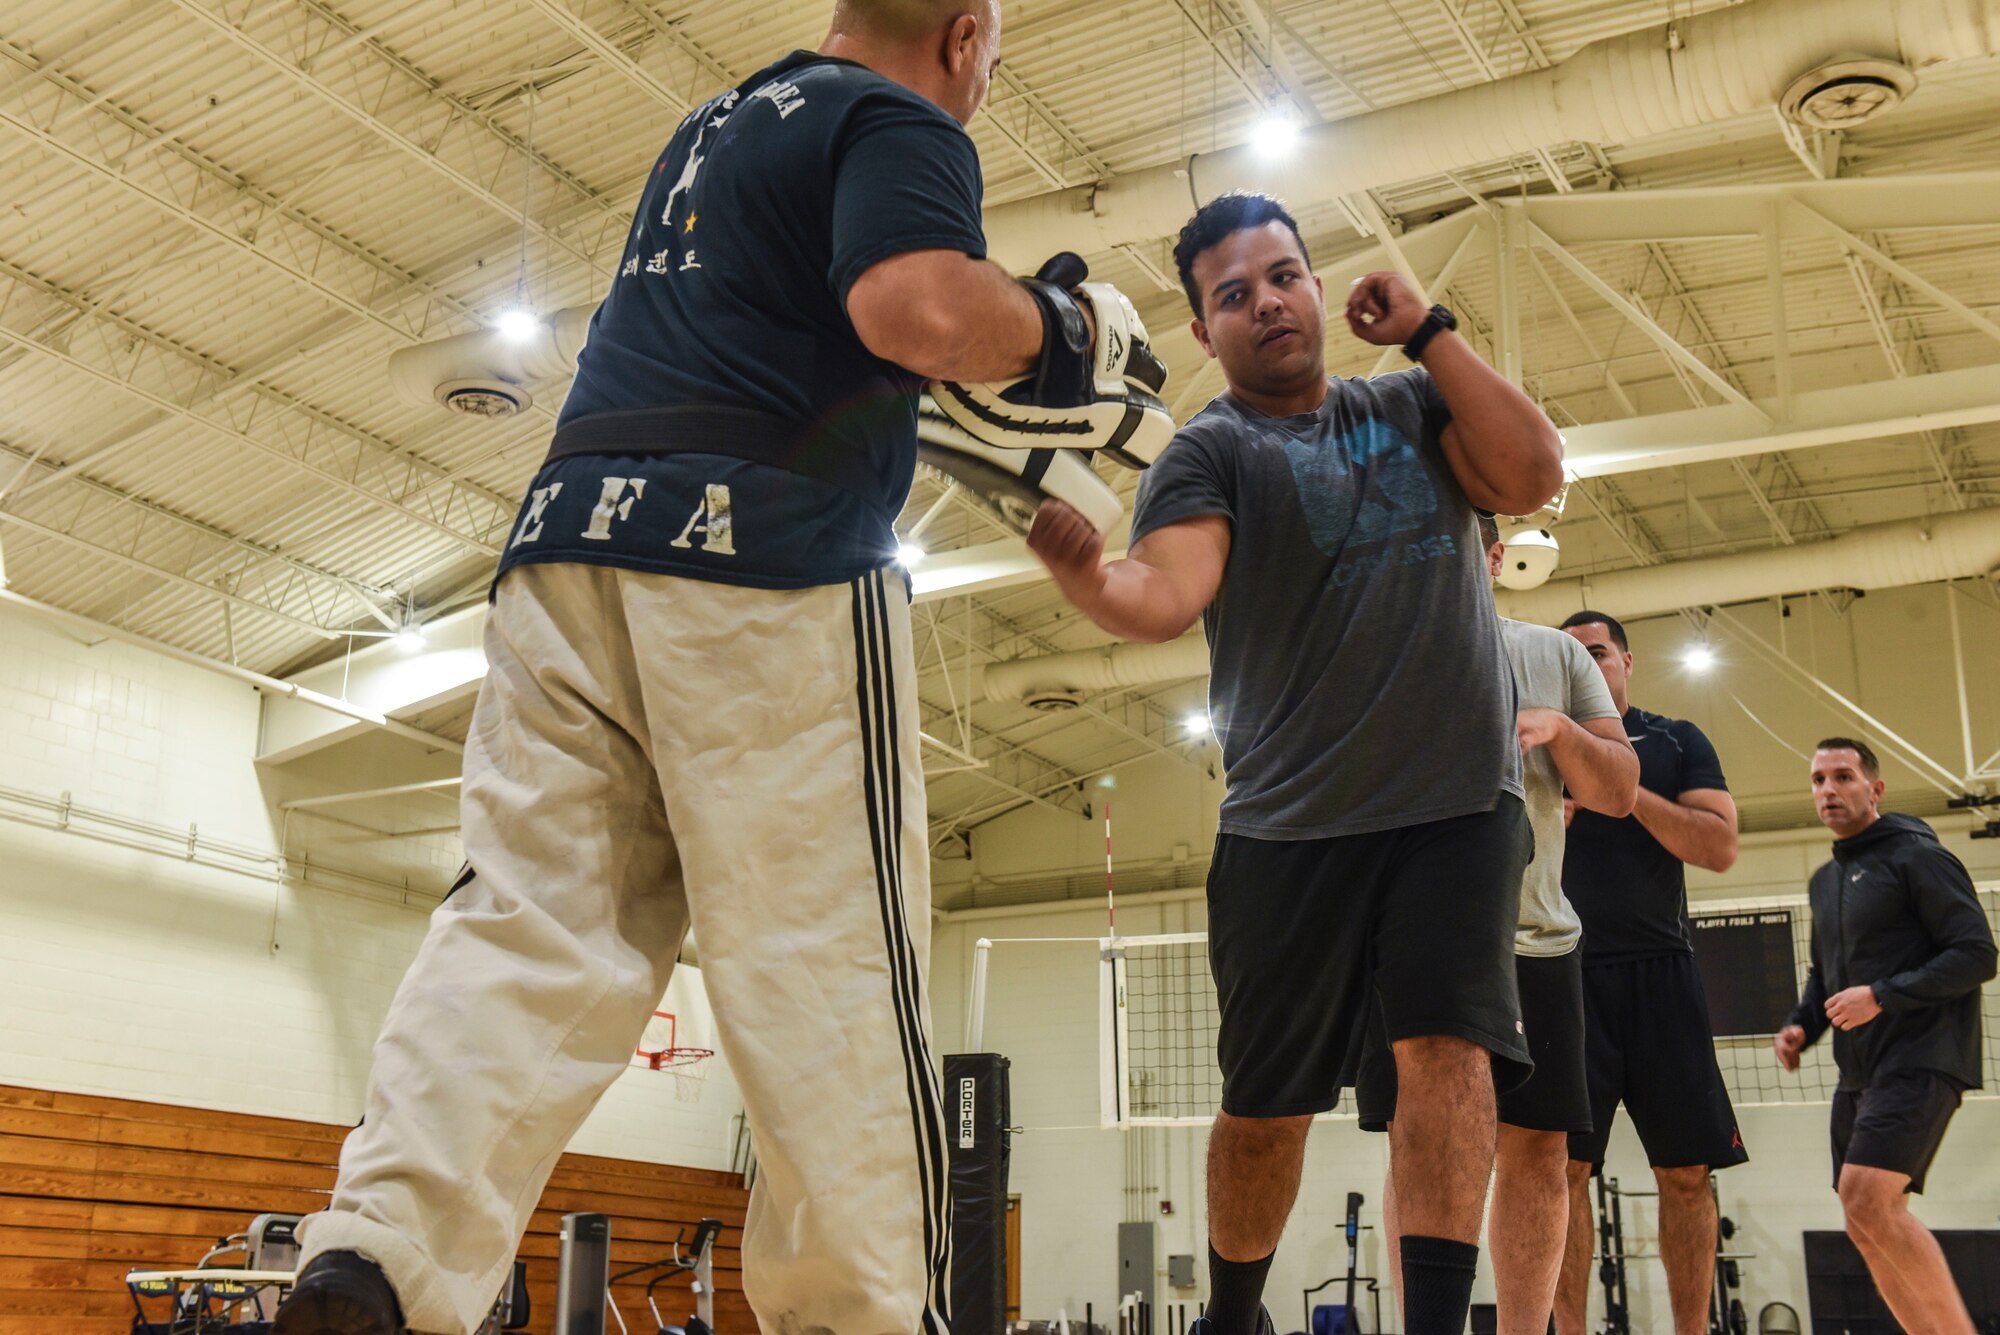 Staff Sergeant David Correa practices punching drills with other 108th Wing Airmen in the McGuire Fitness Center.